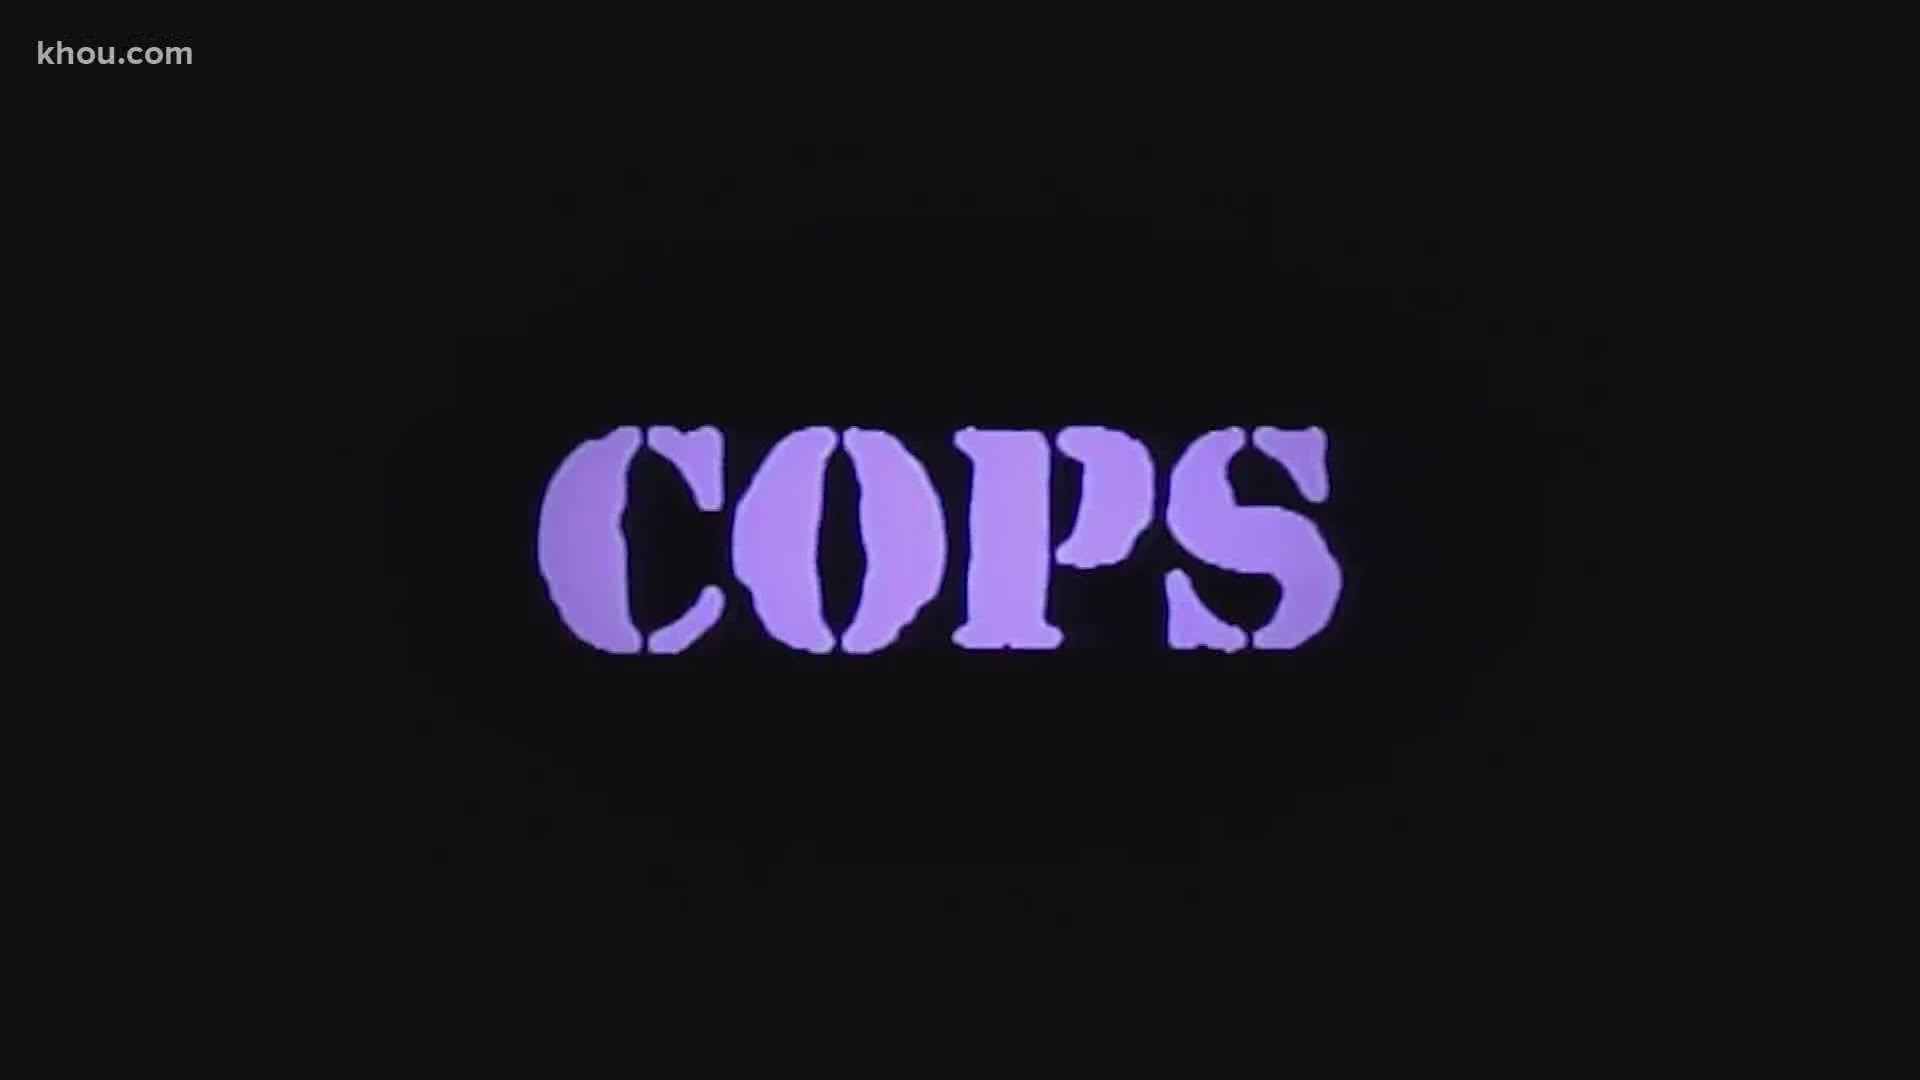 'Cops,' which started in 1989, was taken off the schedule in the wake of protests over the death of George Floyd.